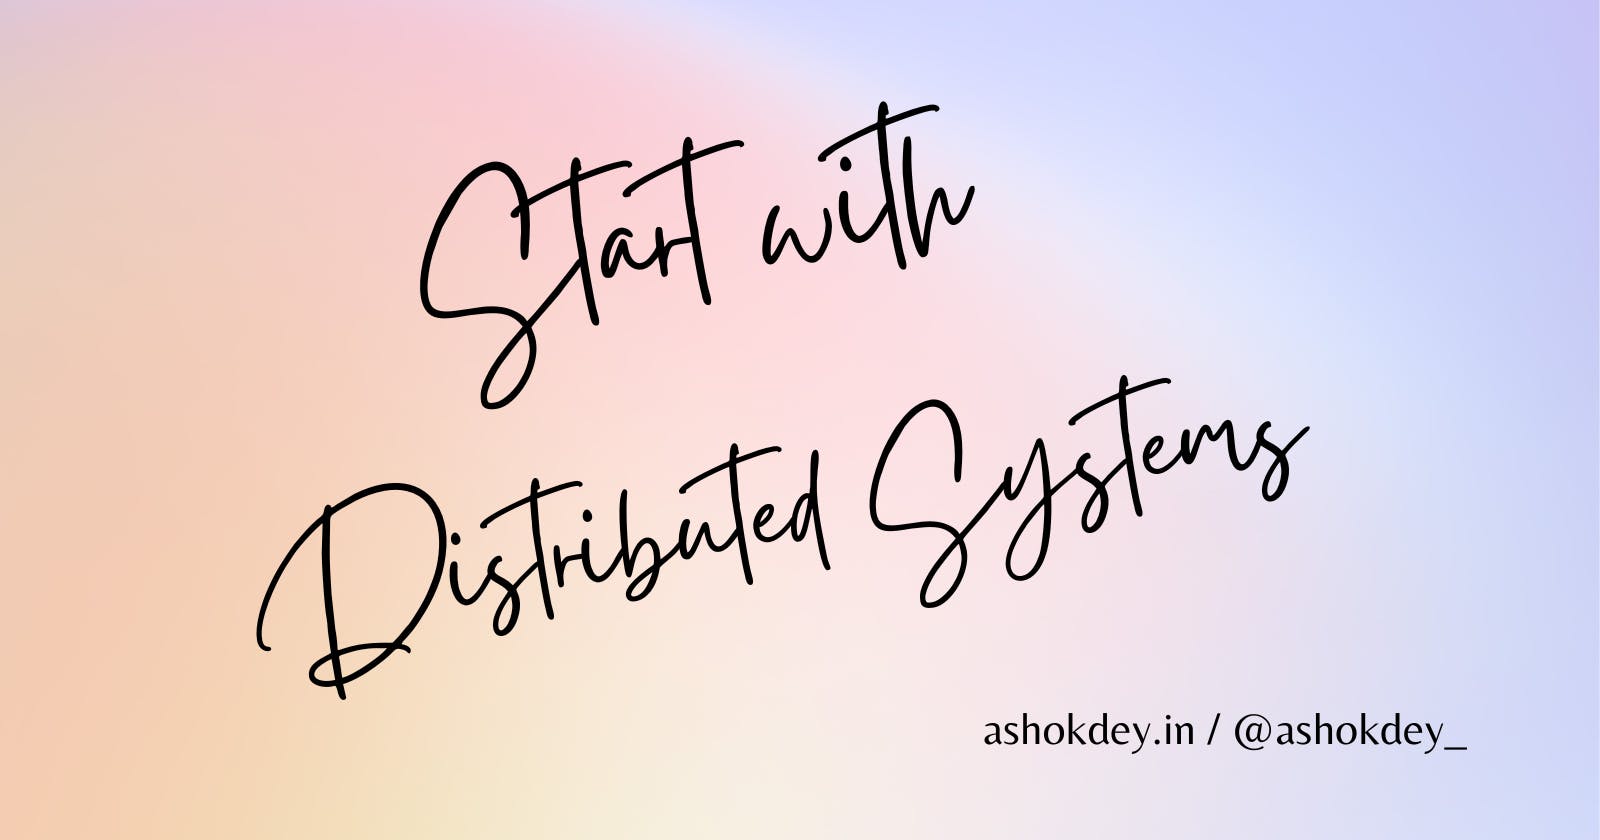 Starting with Distributed Systems